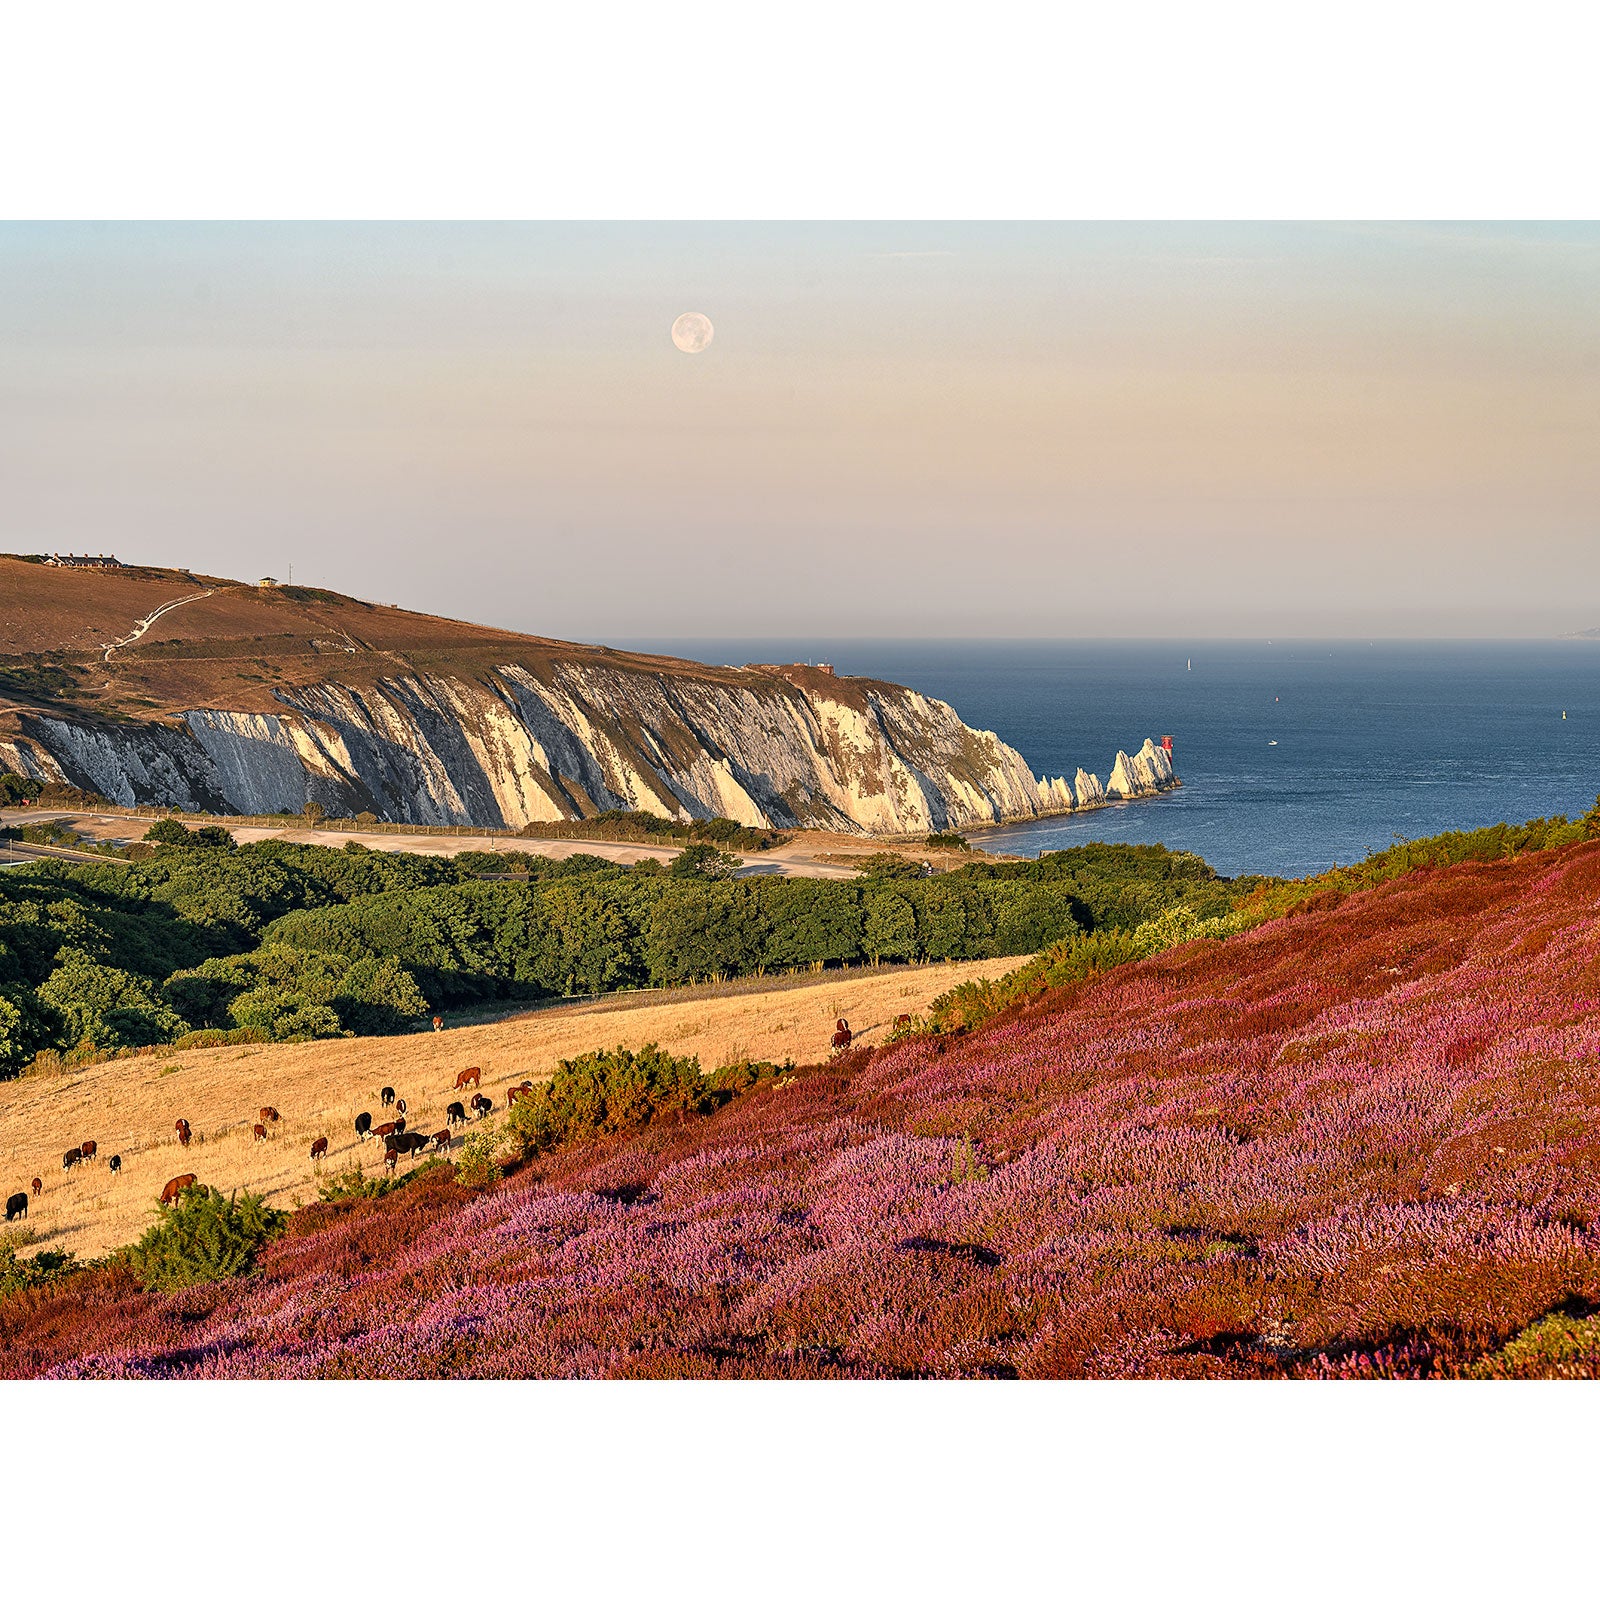 Full Moonset over Headon Warren rising over a coastal landscape with chalk cliffs, heather fields, and grazing cattle on the Isle of Wight by Available Light Photography.